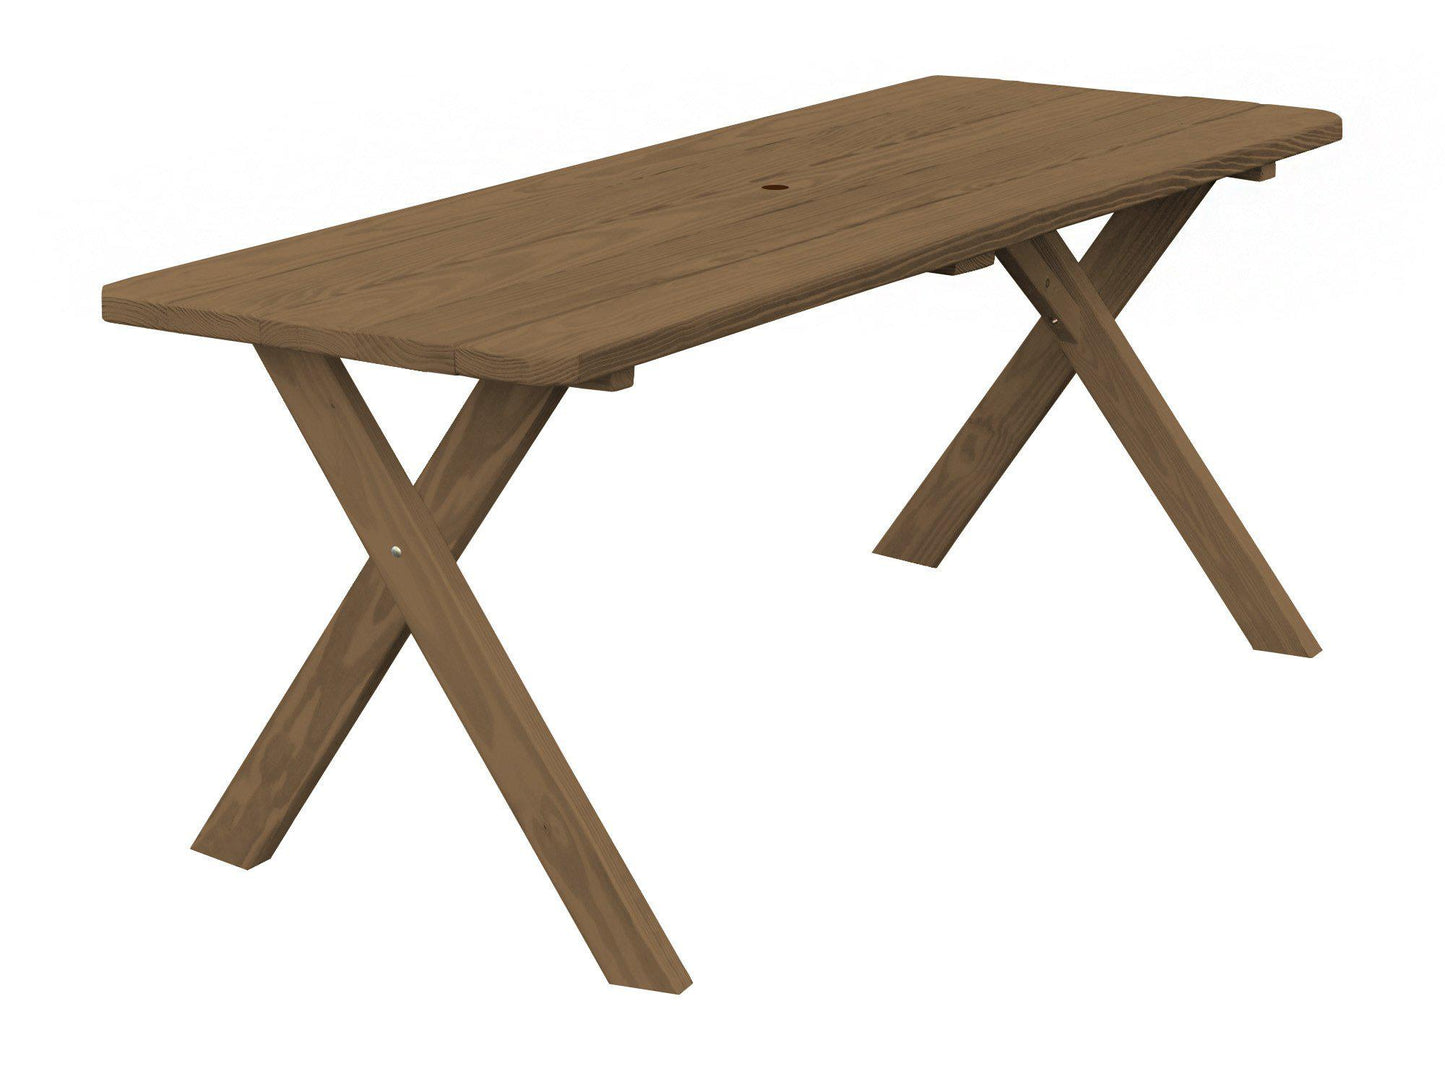 A&L Furniture Co. Yellow Pine 70" Cross-leg Table Only - Specify for Free 2" Umbrella Hole - LEAD TIME TO SHIP 10 BUSINESS DAYS